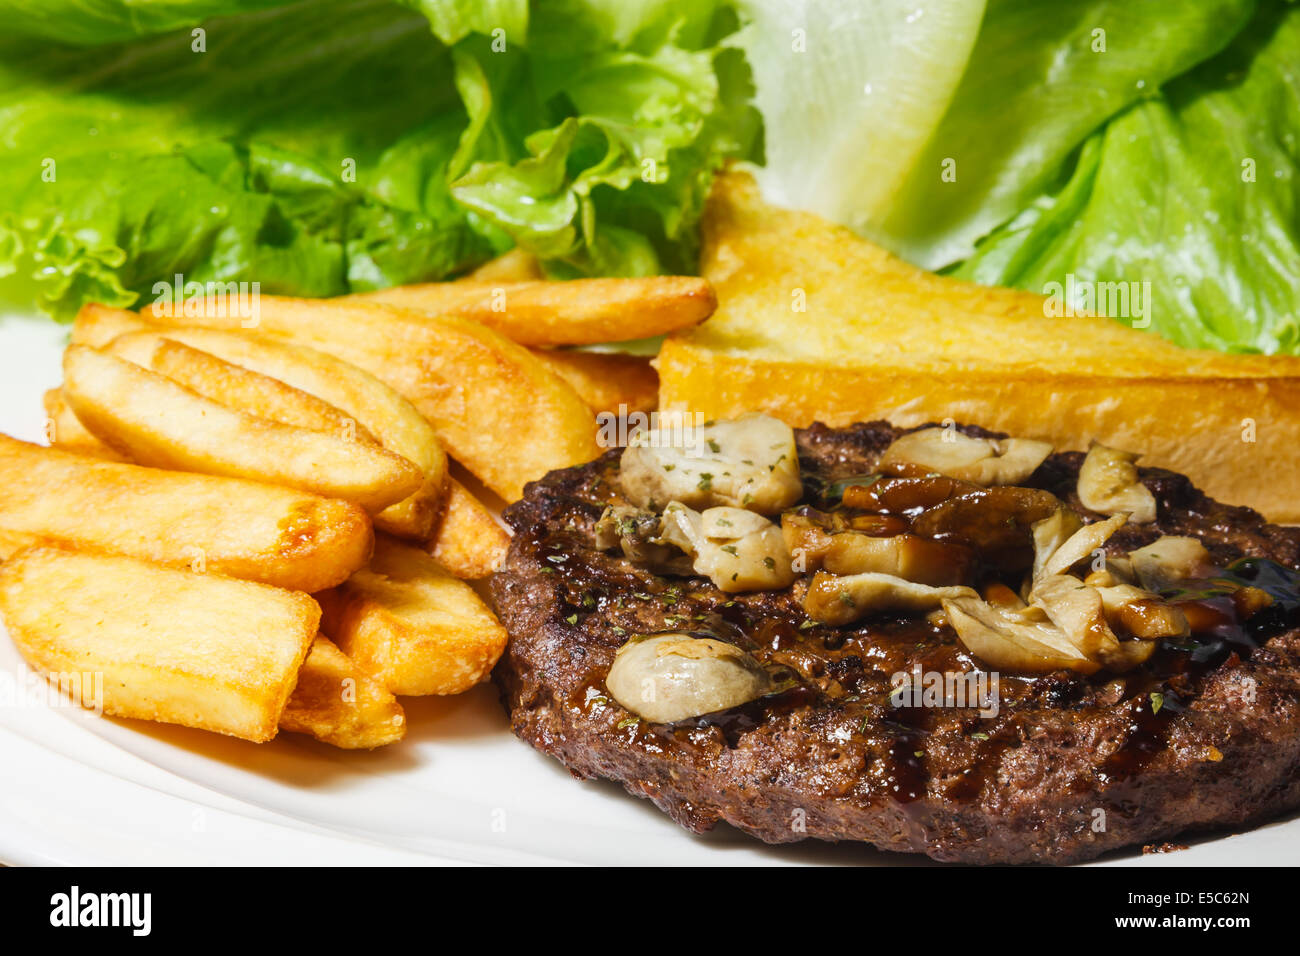 Teriyaki beef with french fries and green vegetable Stock Photo